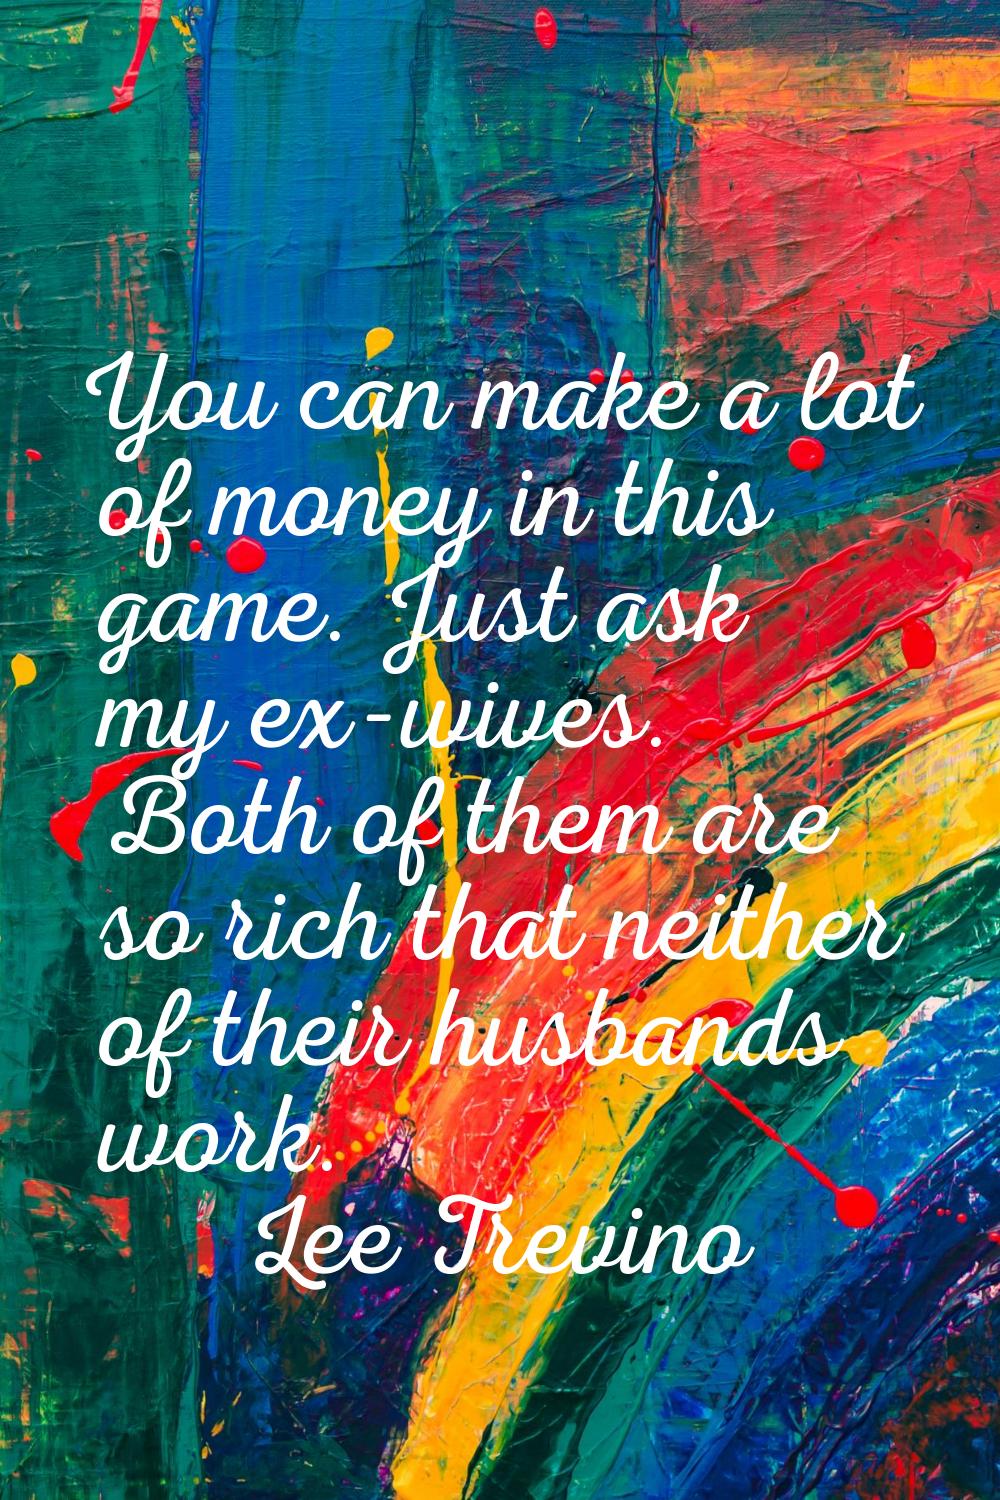 You can make a lot of money in this game. Just ask my ex-wives. Both of them are so rich that neith